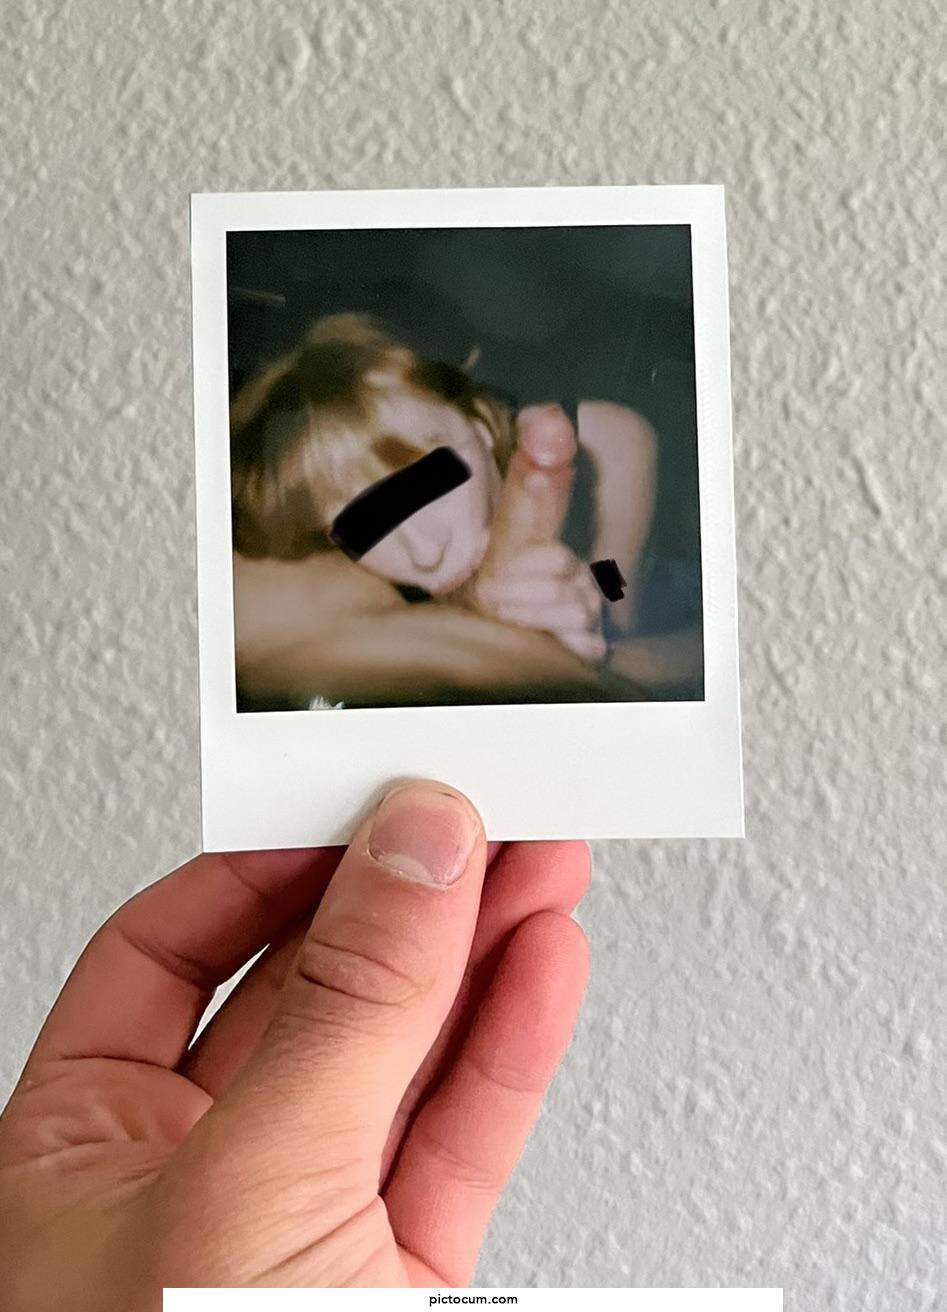 Took some Polaroids with this guys gf. Should I just drop them off at his house?